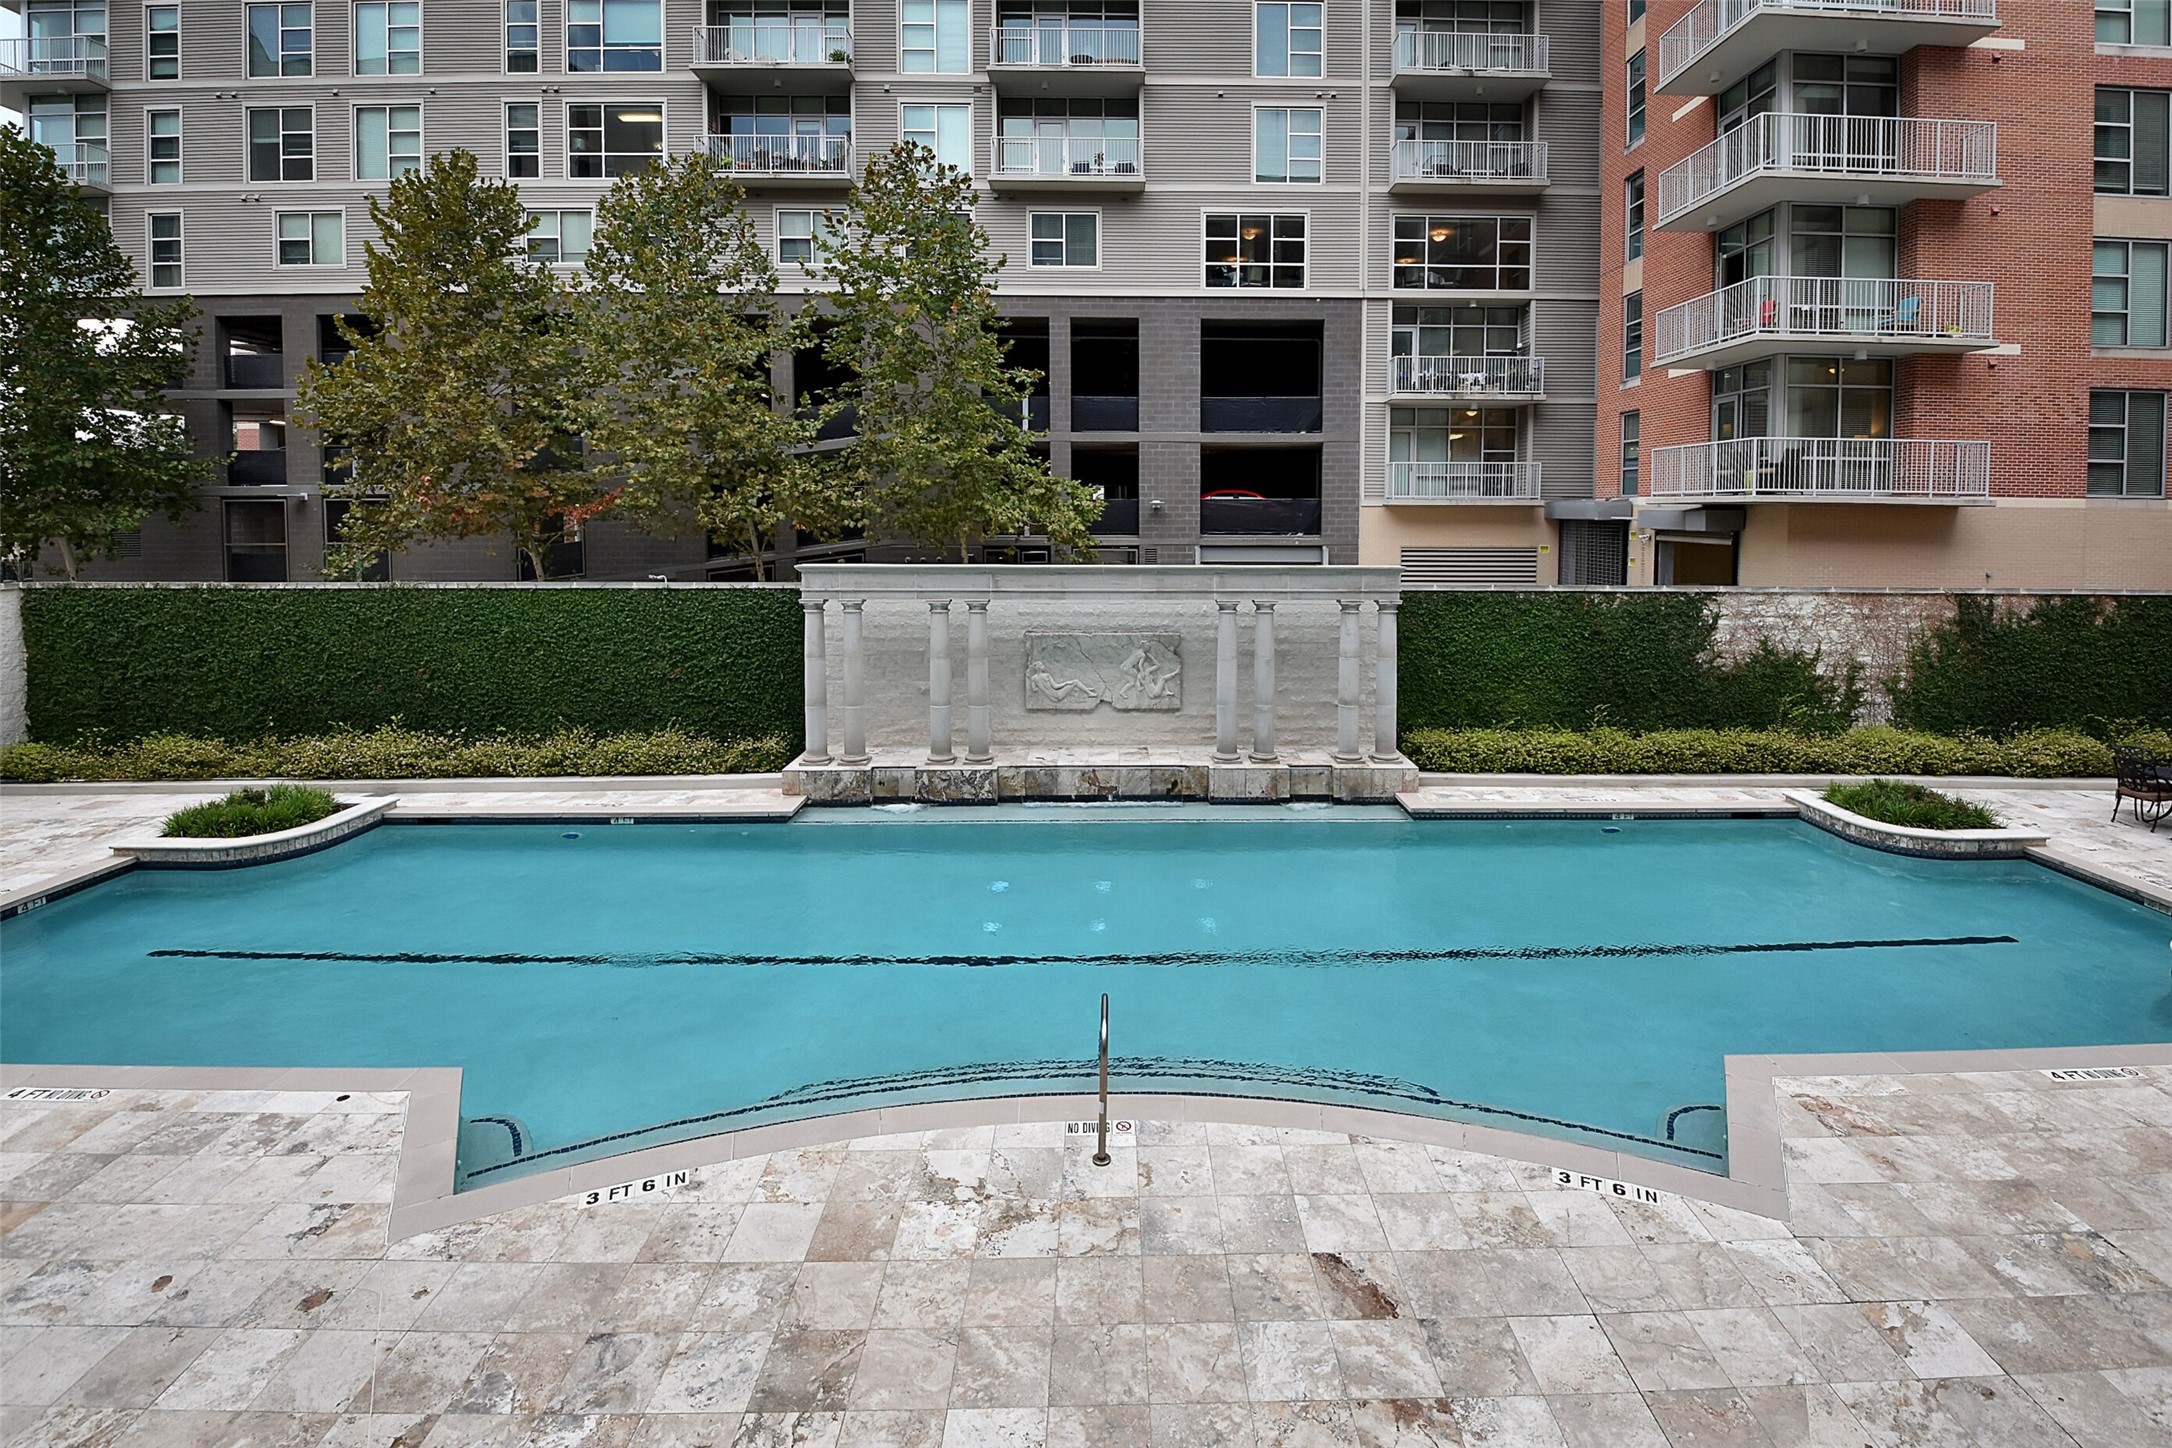 CONDO AMENITIES INCLUDE THIS RESORT STYLE-SWIMMING POOL